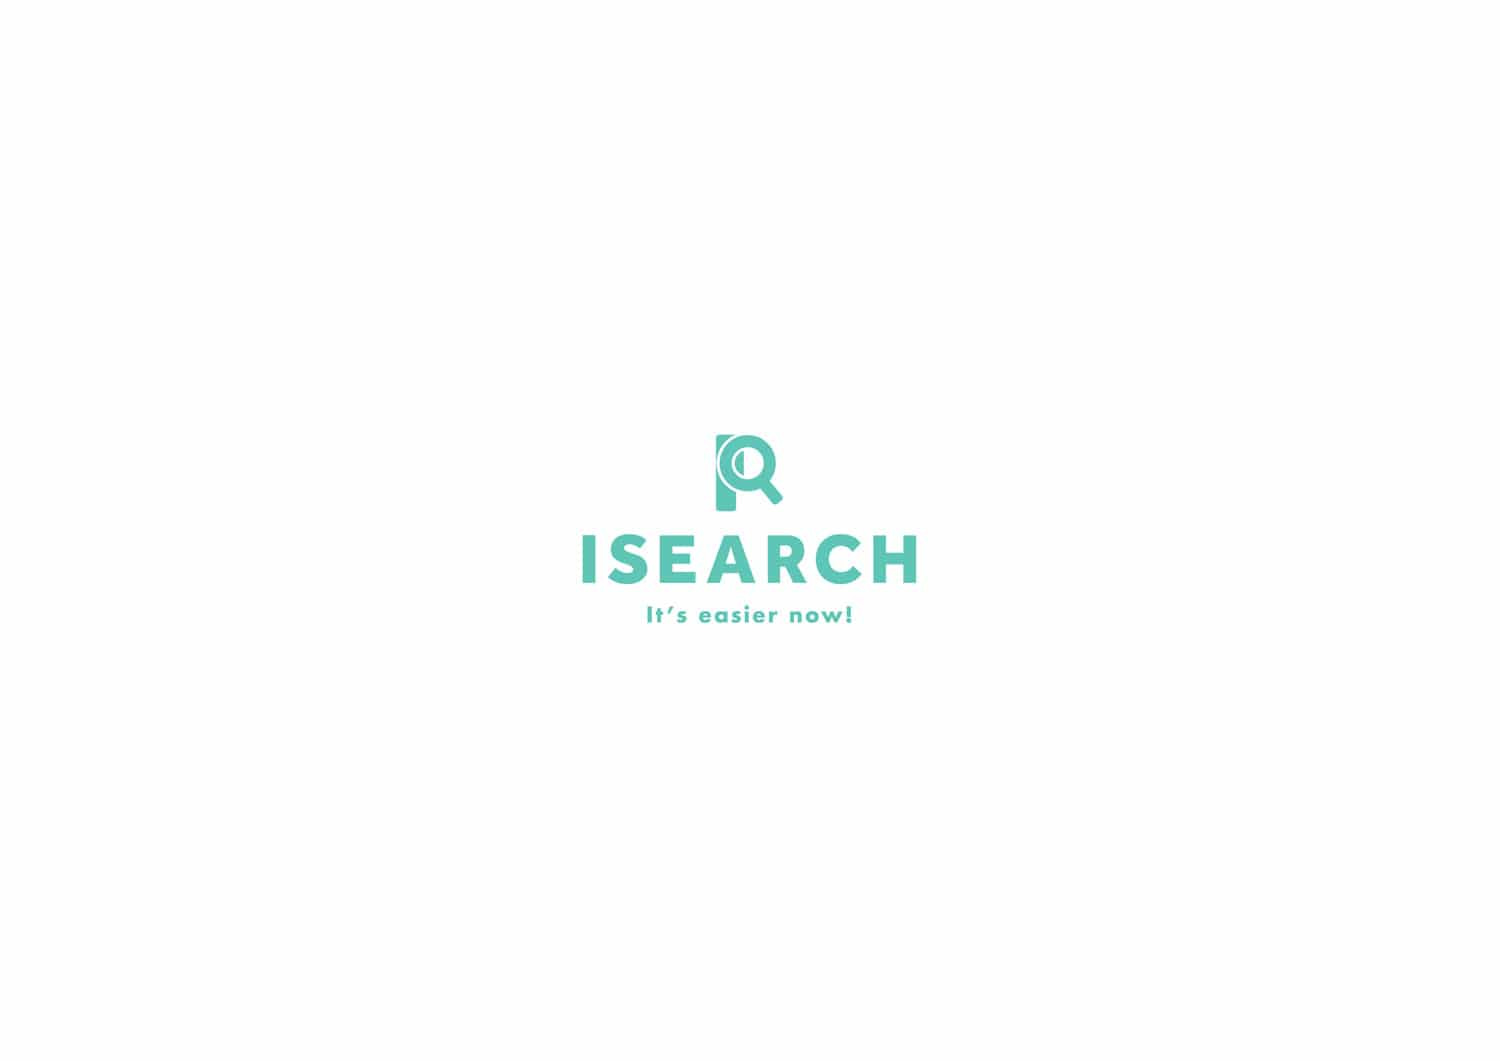 ISEARCH logo color white11